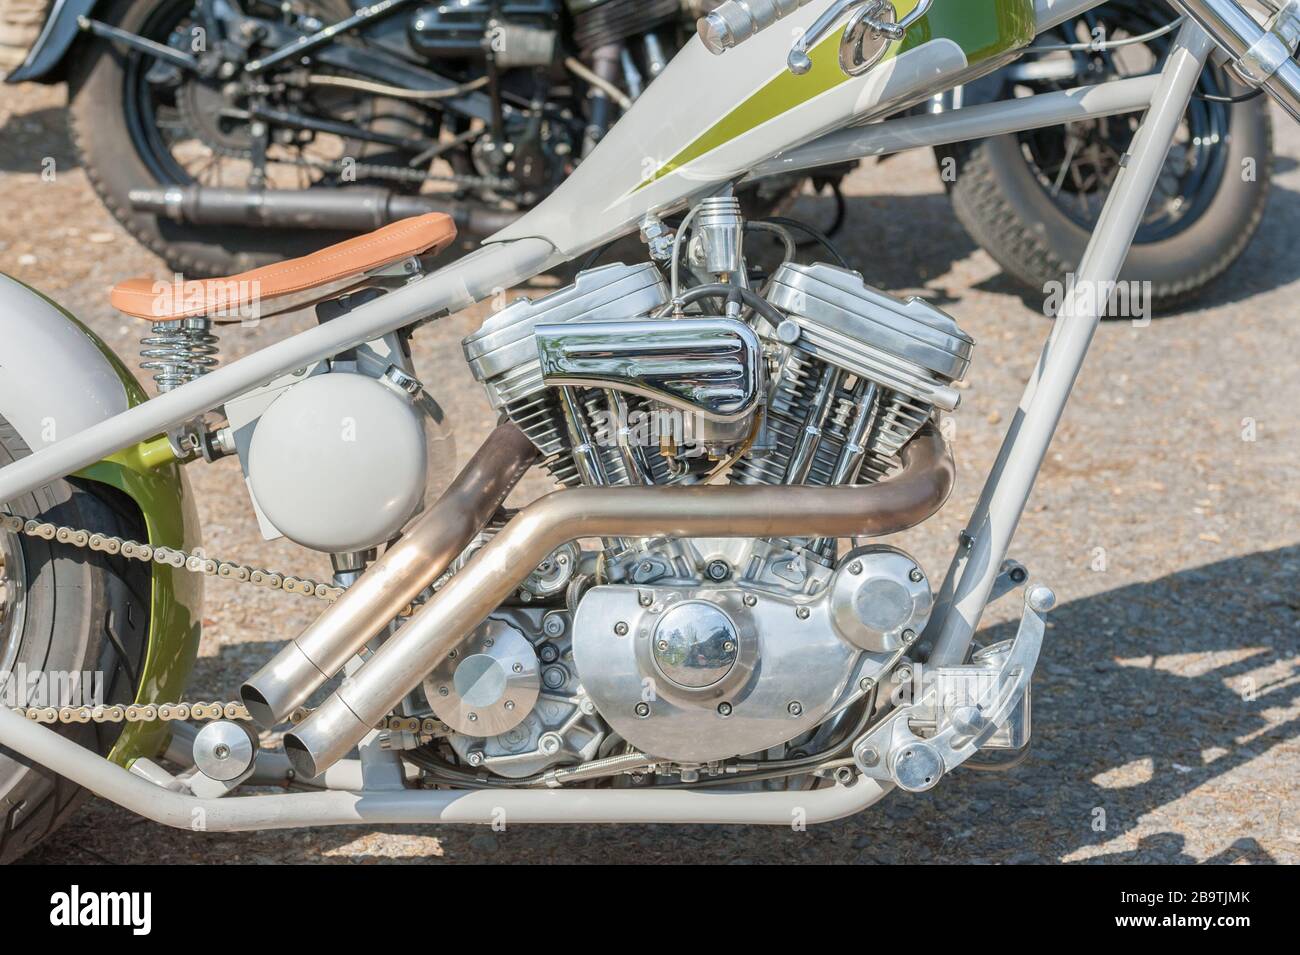 chromed custom motorcycle engine and exhaust pipe closeup Stock Photo